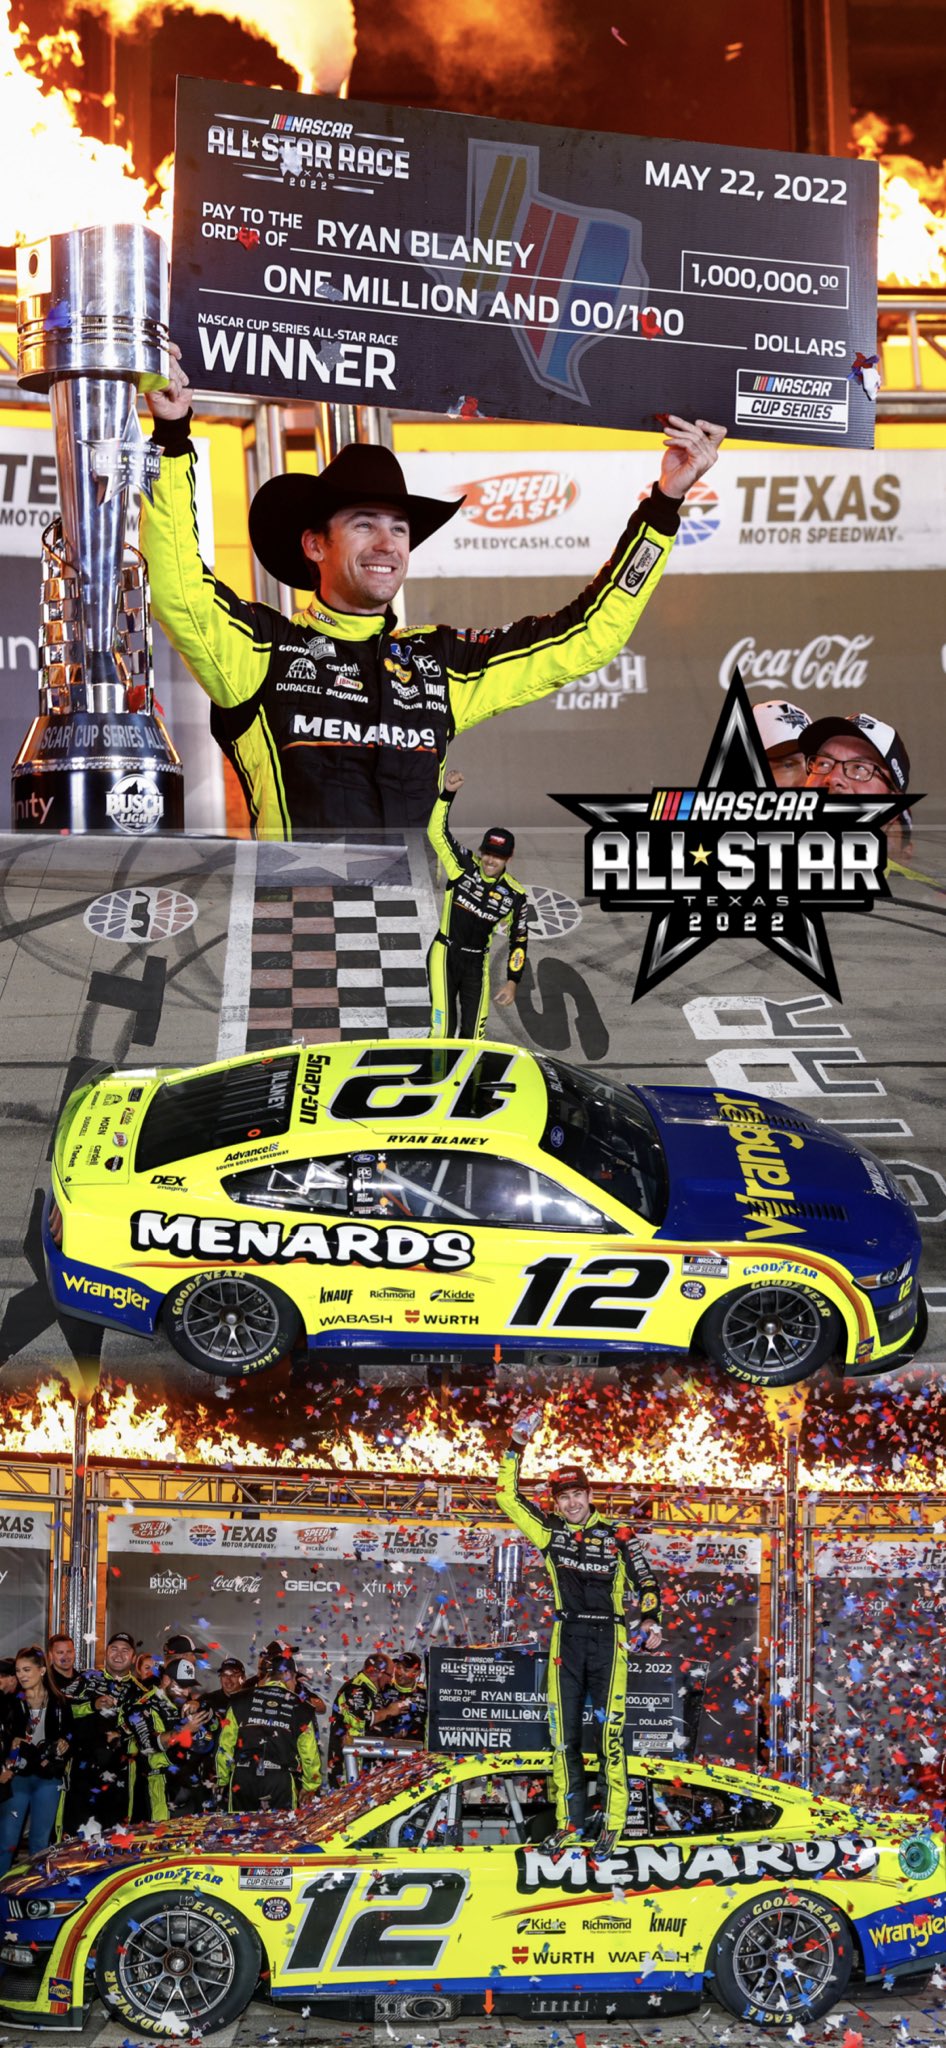 NASCAR Wallpaper Blaney thought he won the All Star Race before learning it was not over. With a little controversy, Blaney was still able to net $1 million on